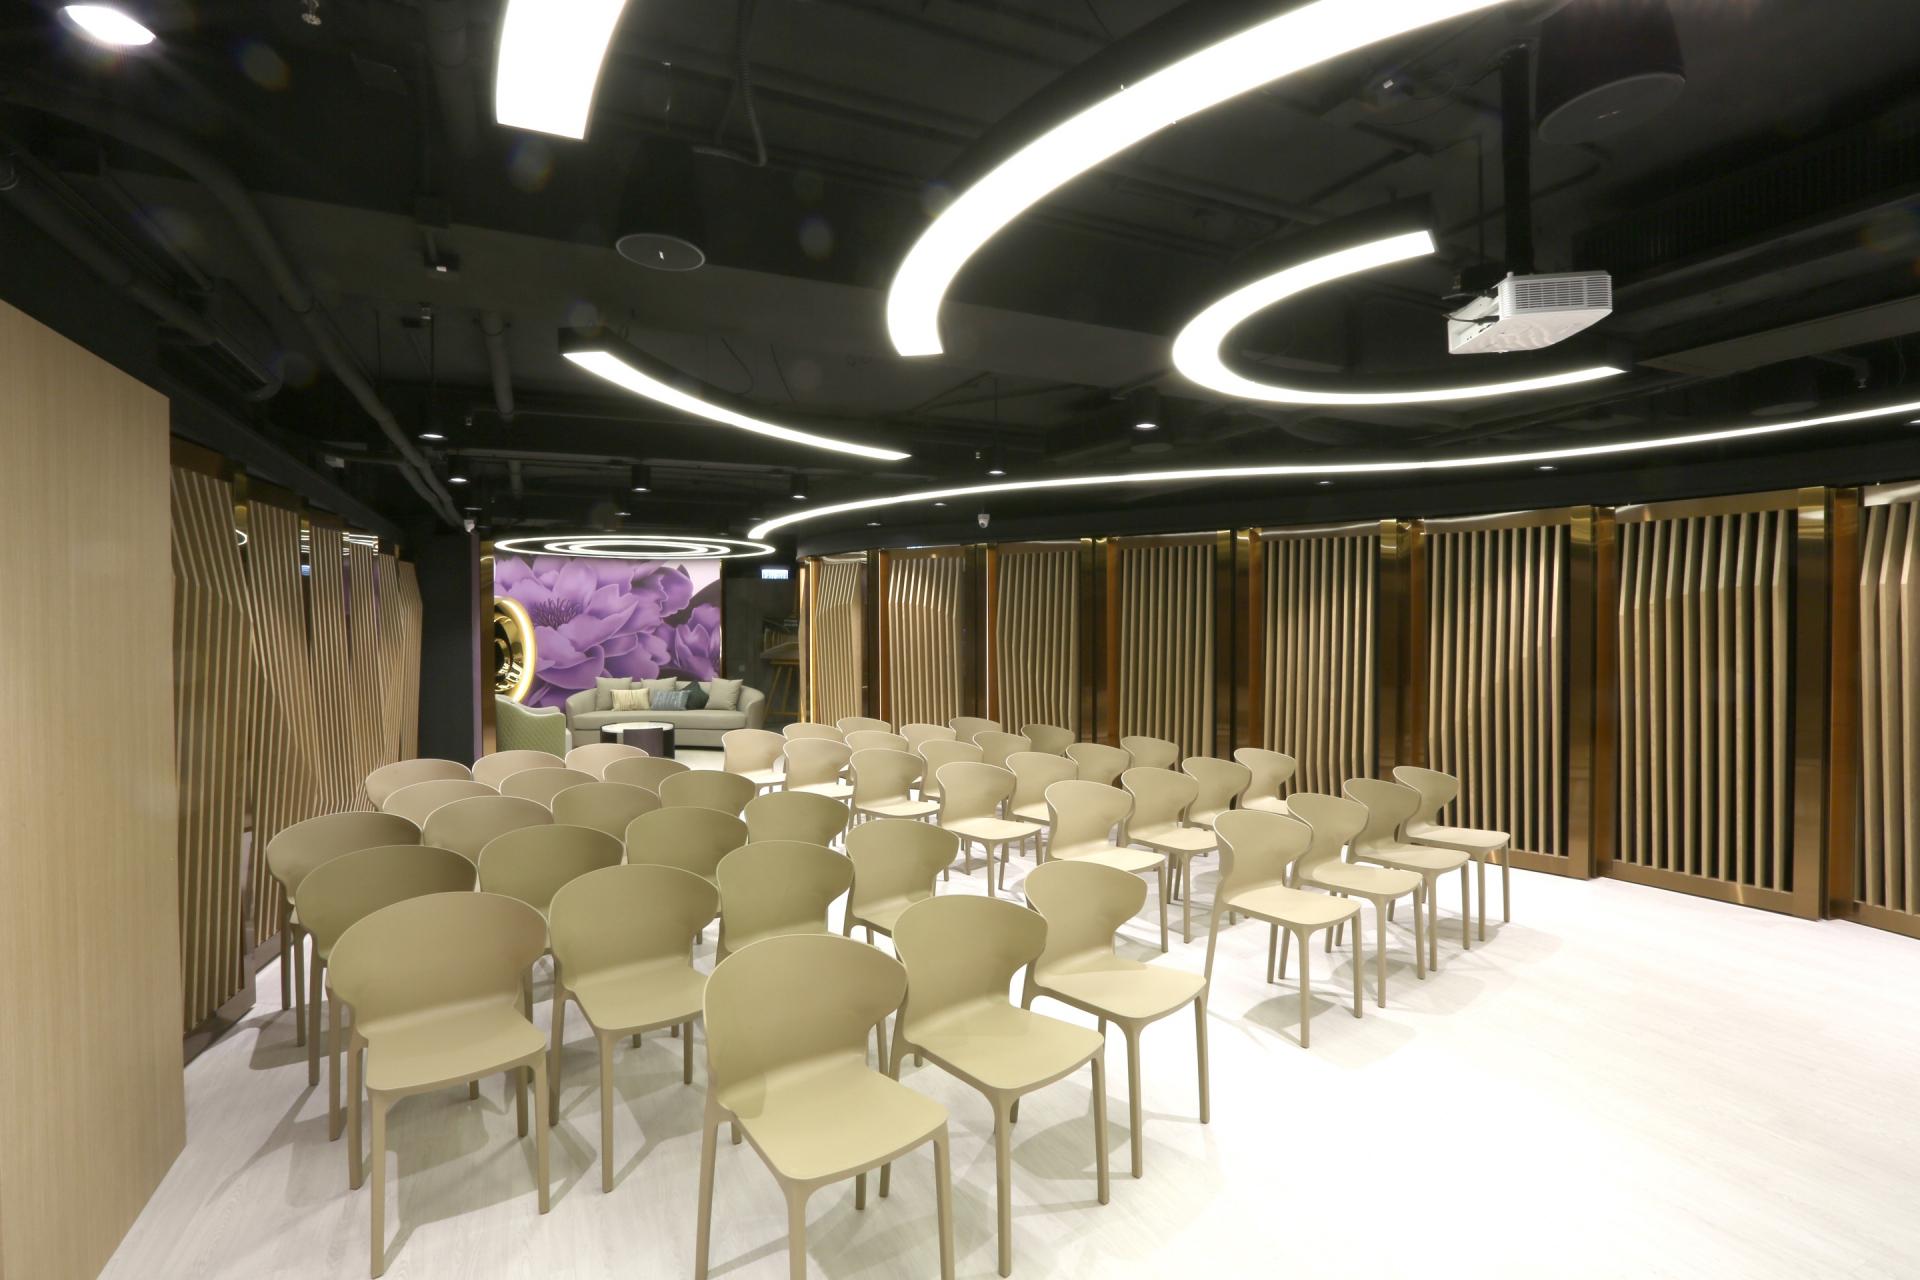 Heritage, legacy and delicate light play inspire this elegant event space in Mong Kok